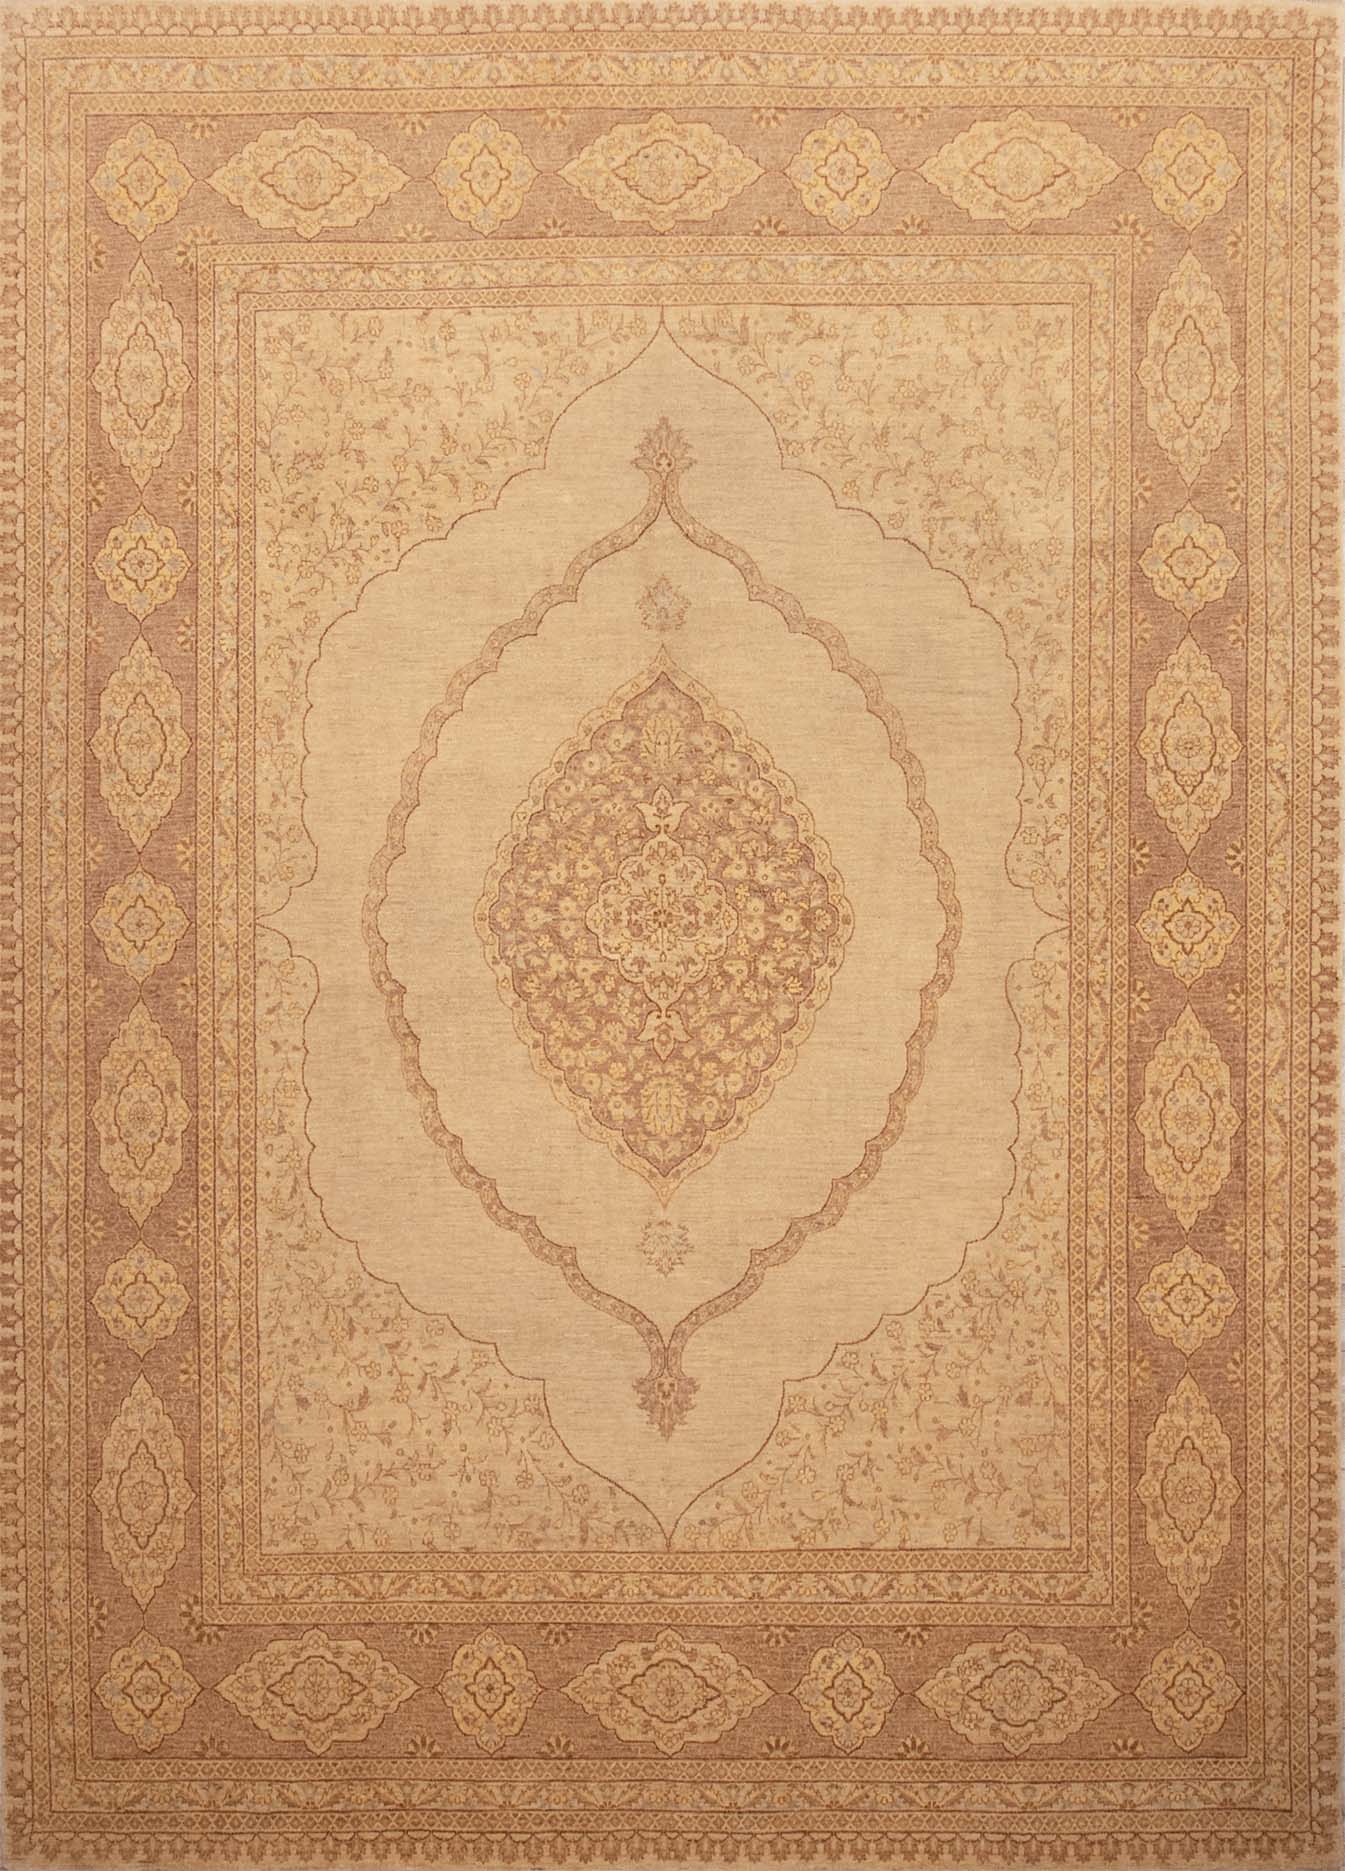 Hand Knotted Oriental Rug, Transitional Ziegler Rug, Earth Tone Color Rug